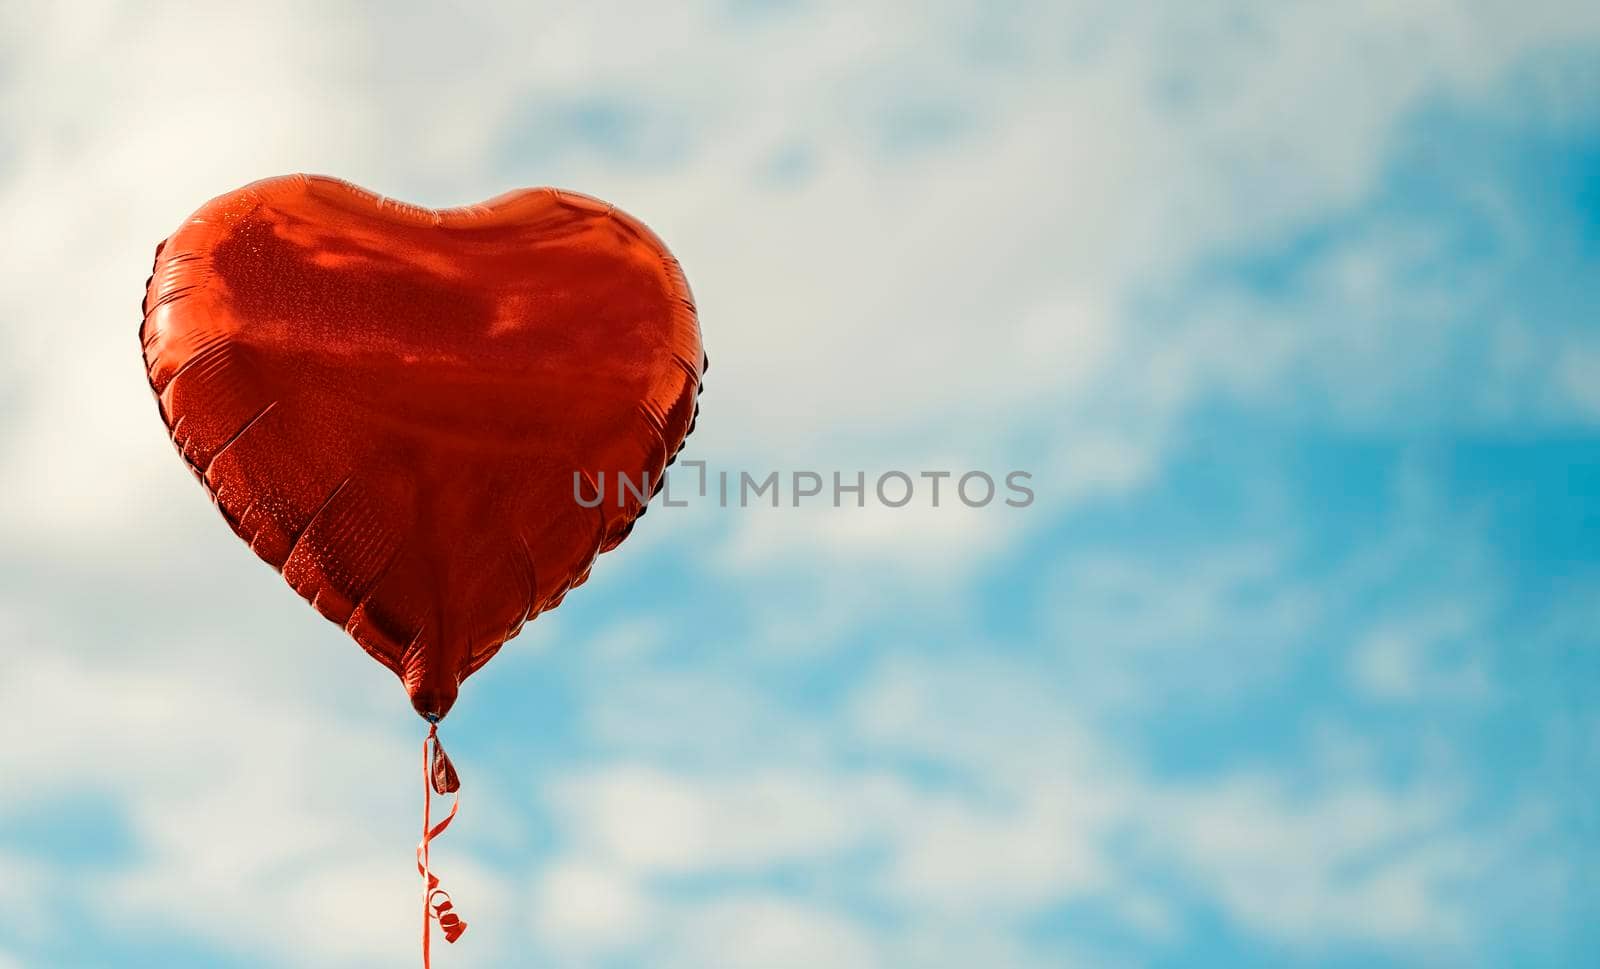 red balloon in the shape of a heart against the blue sky Space for text Holiday card, Happy Valentine's day concept Love in air